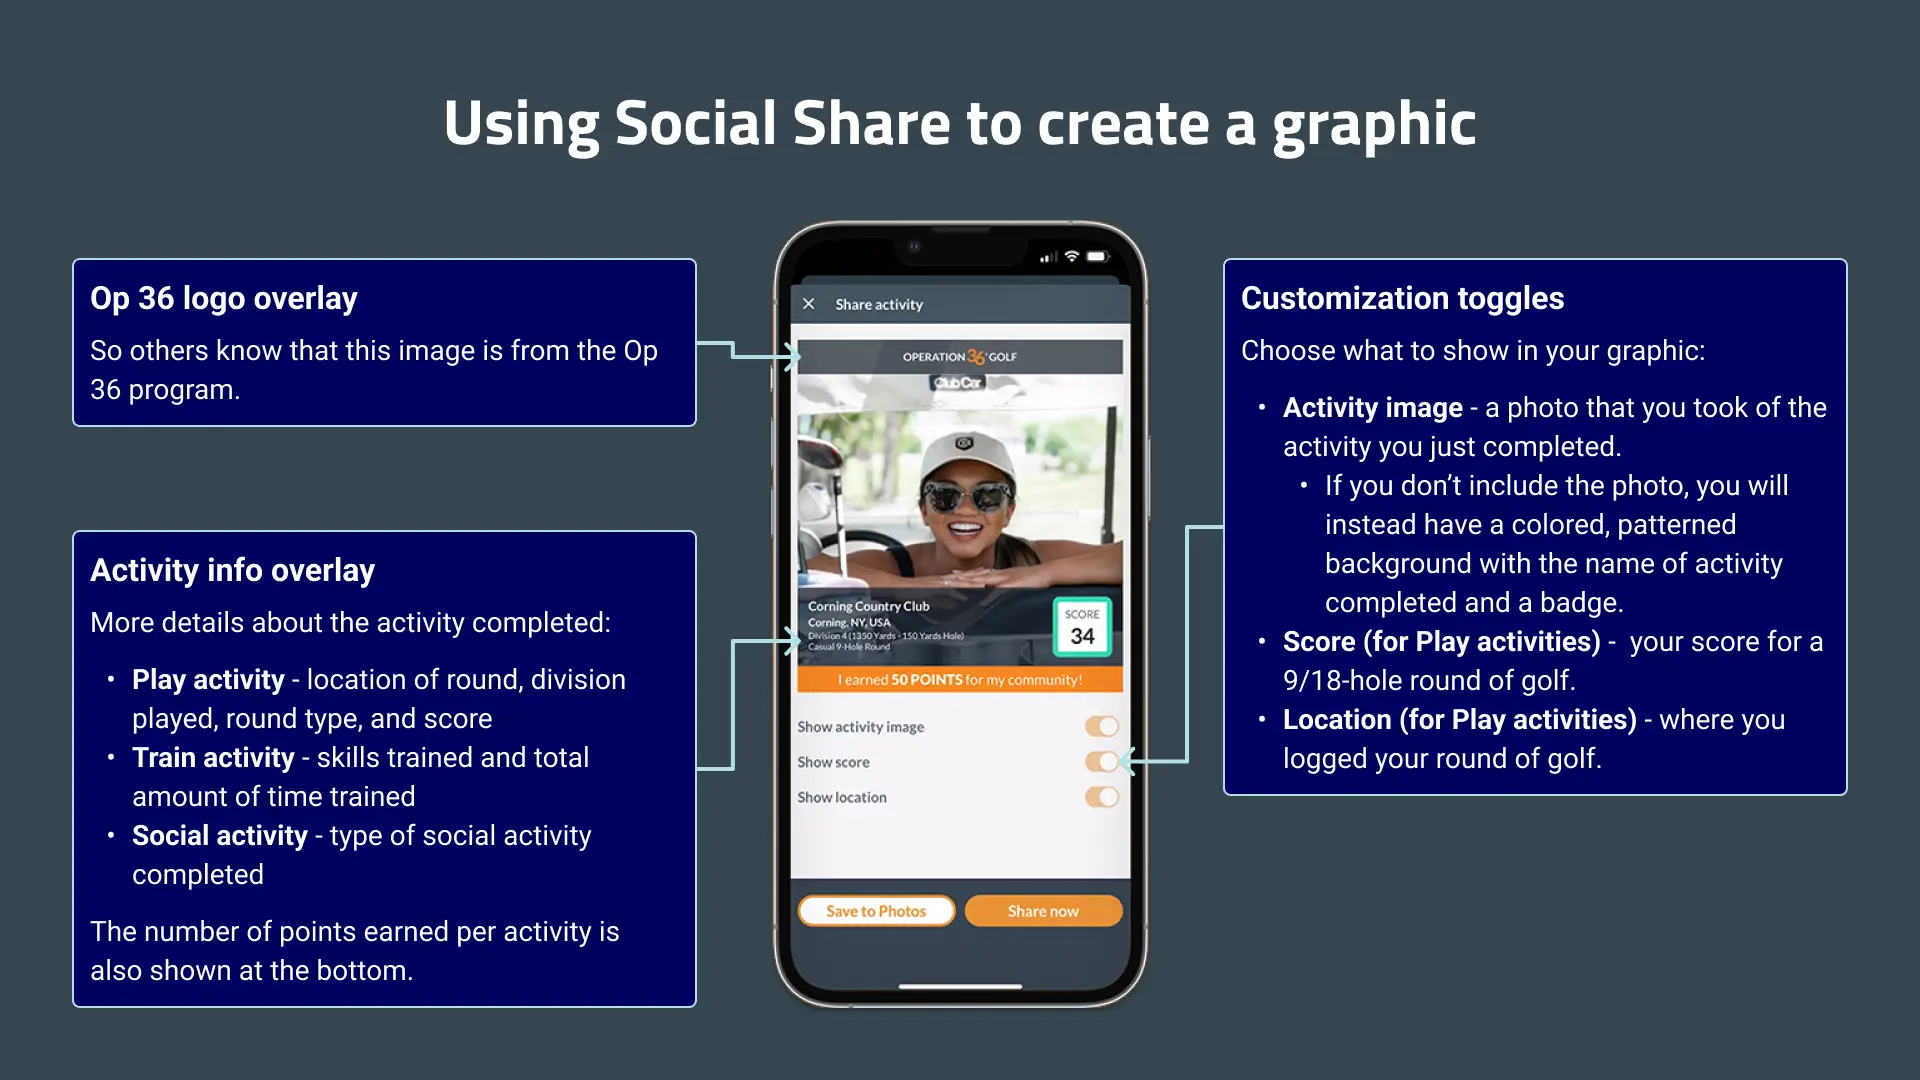 Key features of Social Share.